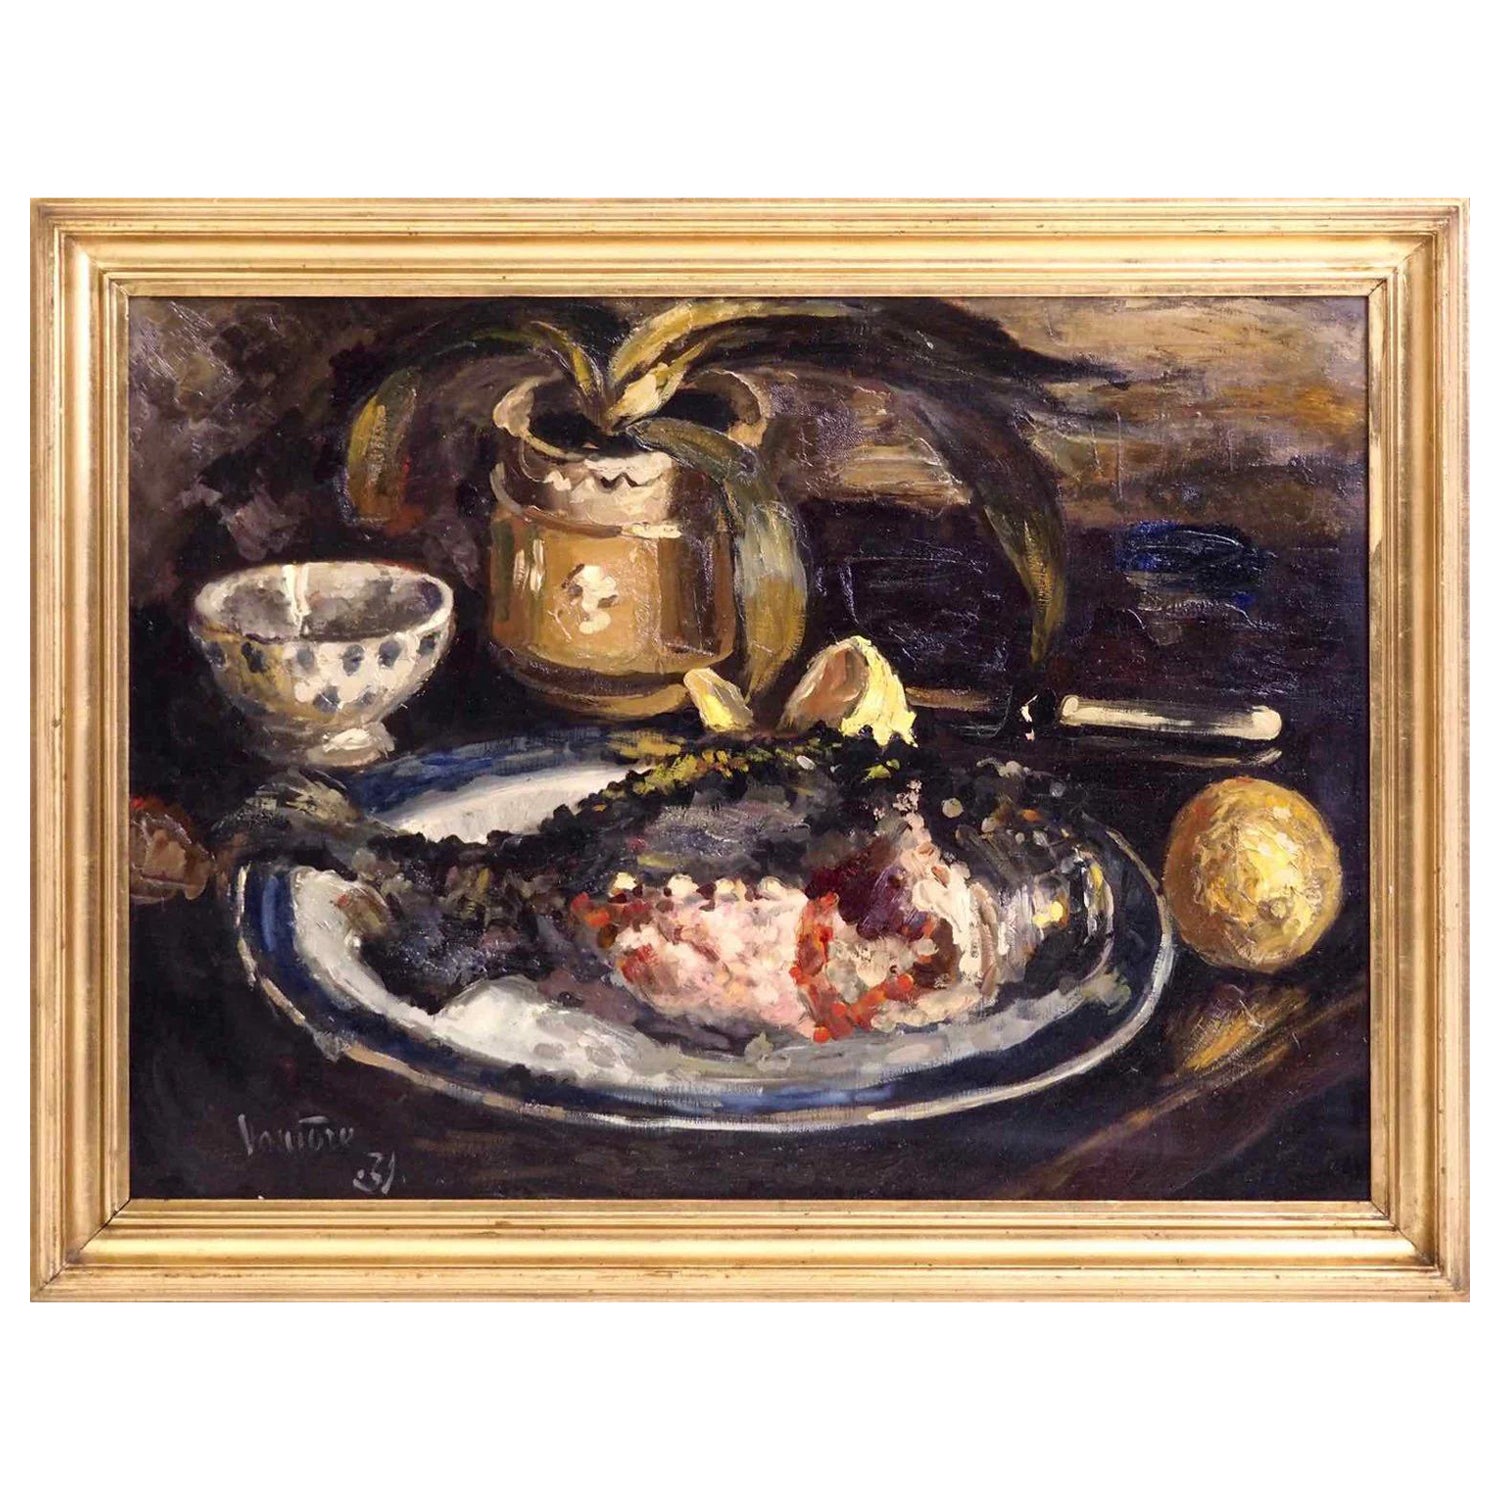 Fine nature morte painting, oil on canvas, singed and dated “31” For Sale